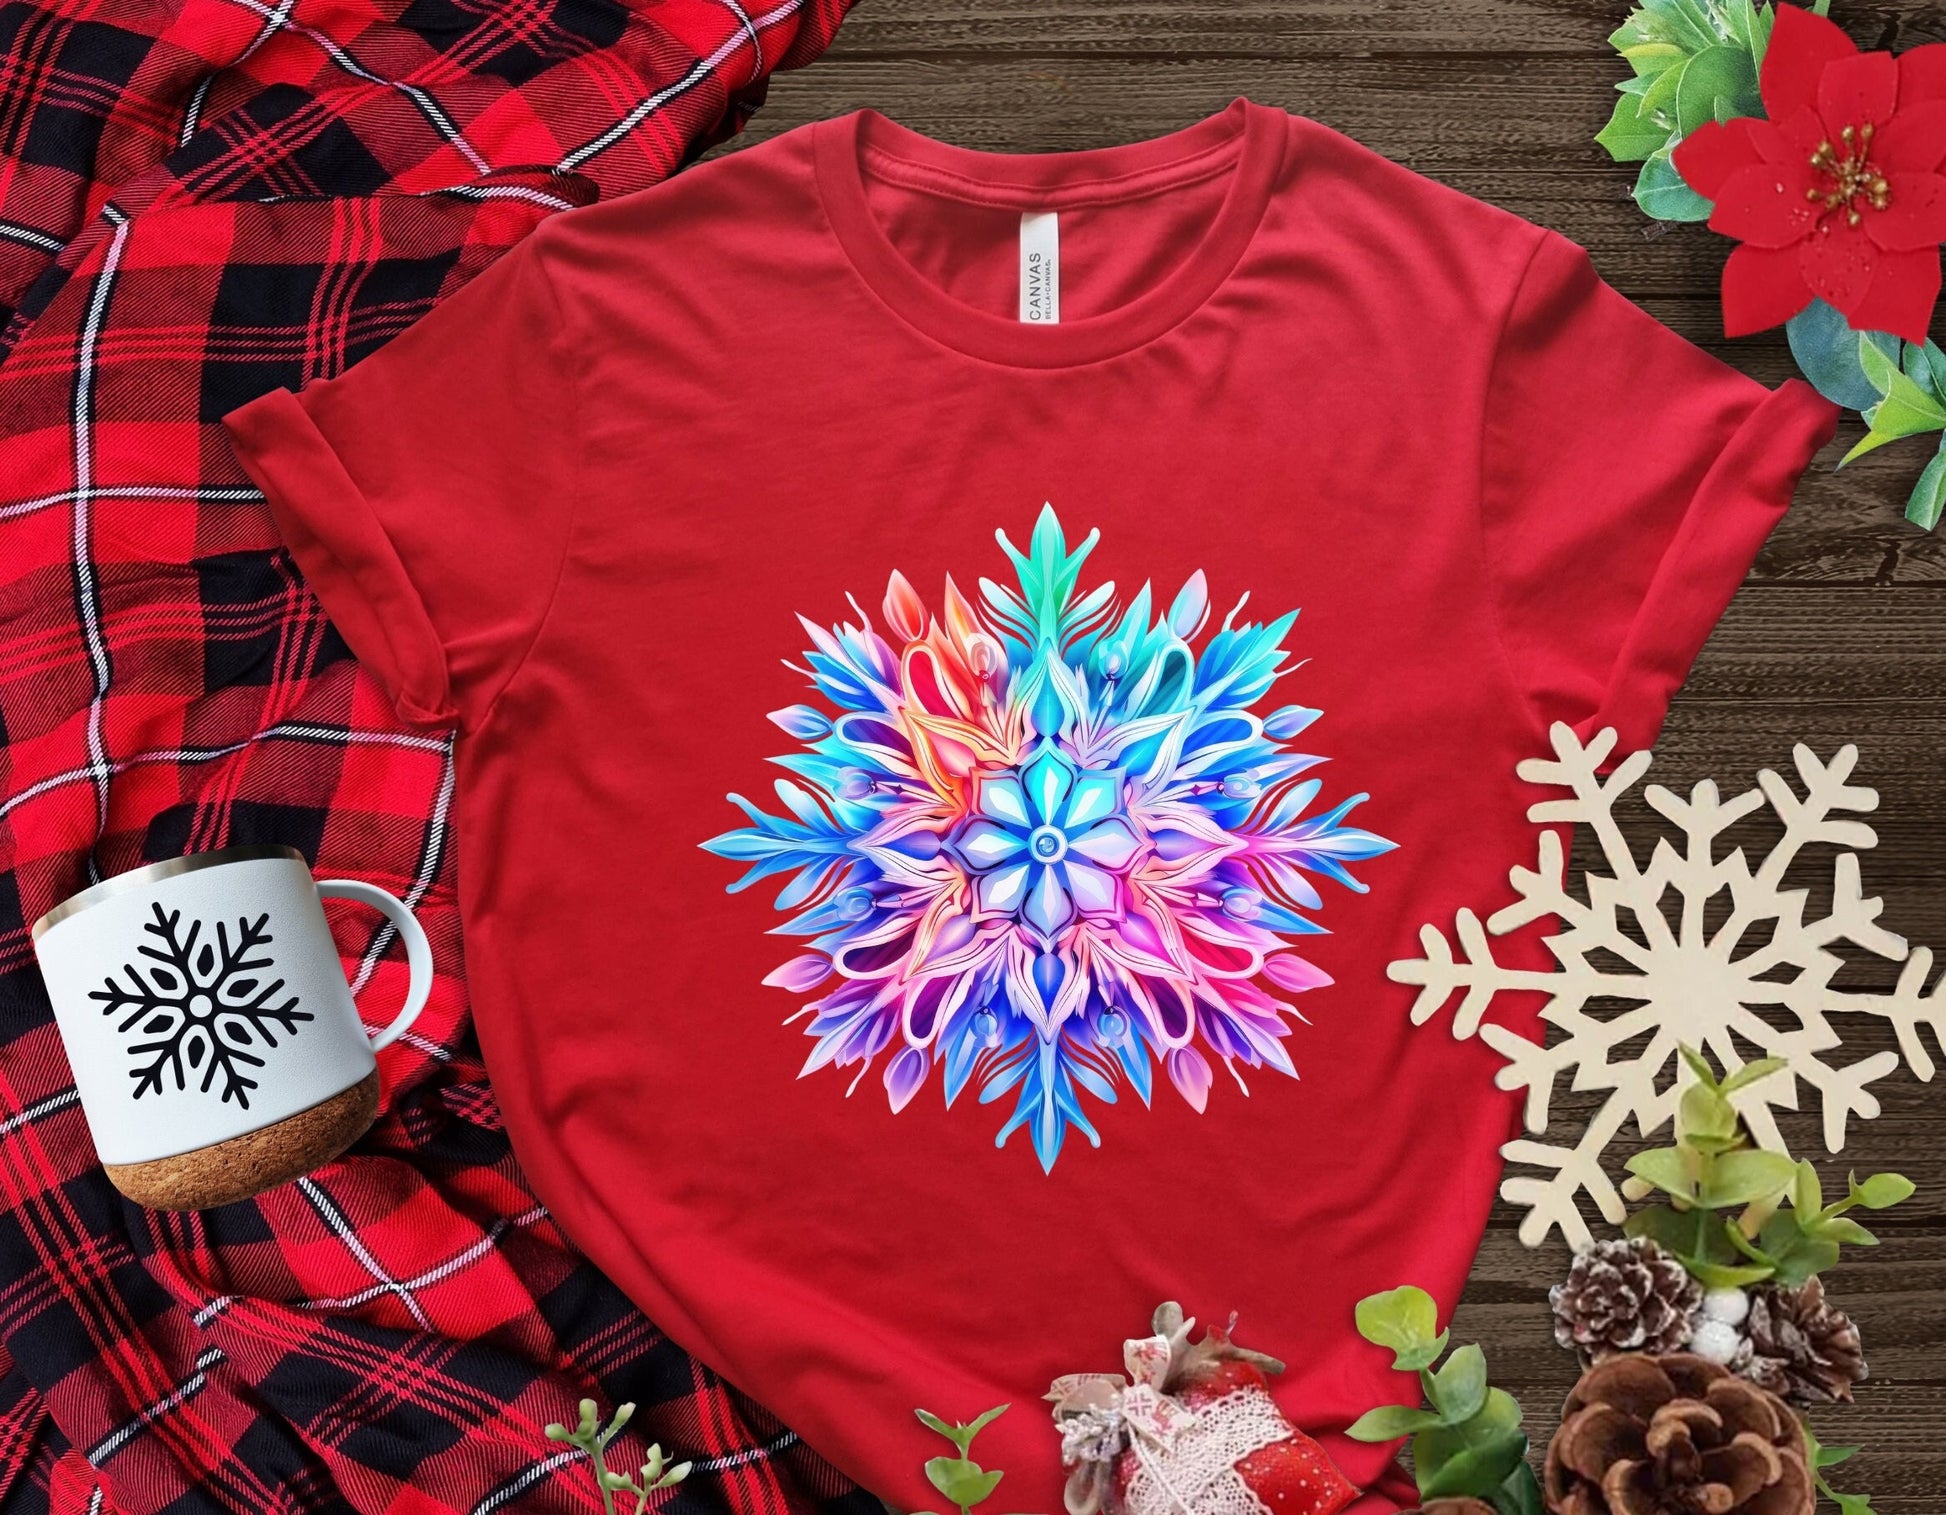 The Snow Flake Dance Christmas T-Shirt Makes the Perfect Gift for Friends, Family, Coworkers or yourself.  Check Out My Shop for even more Great Designs.
www.scorpiontees.etsy.com